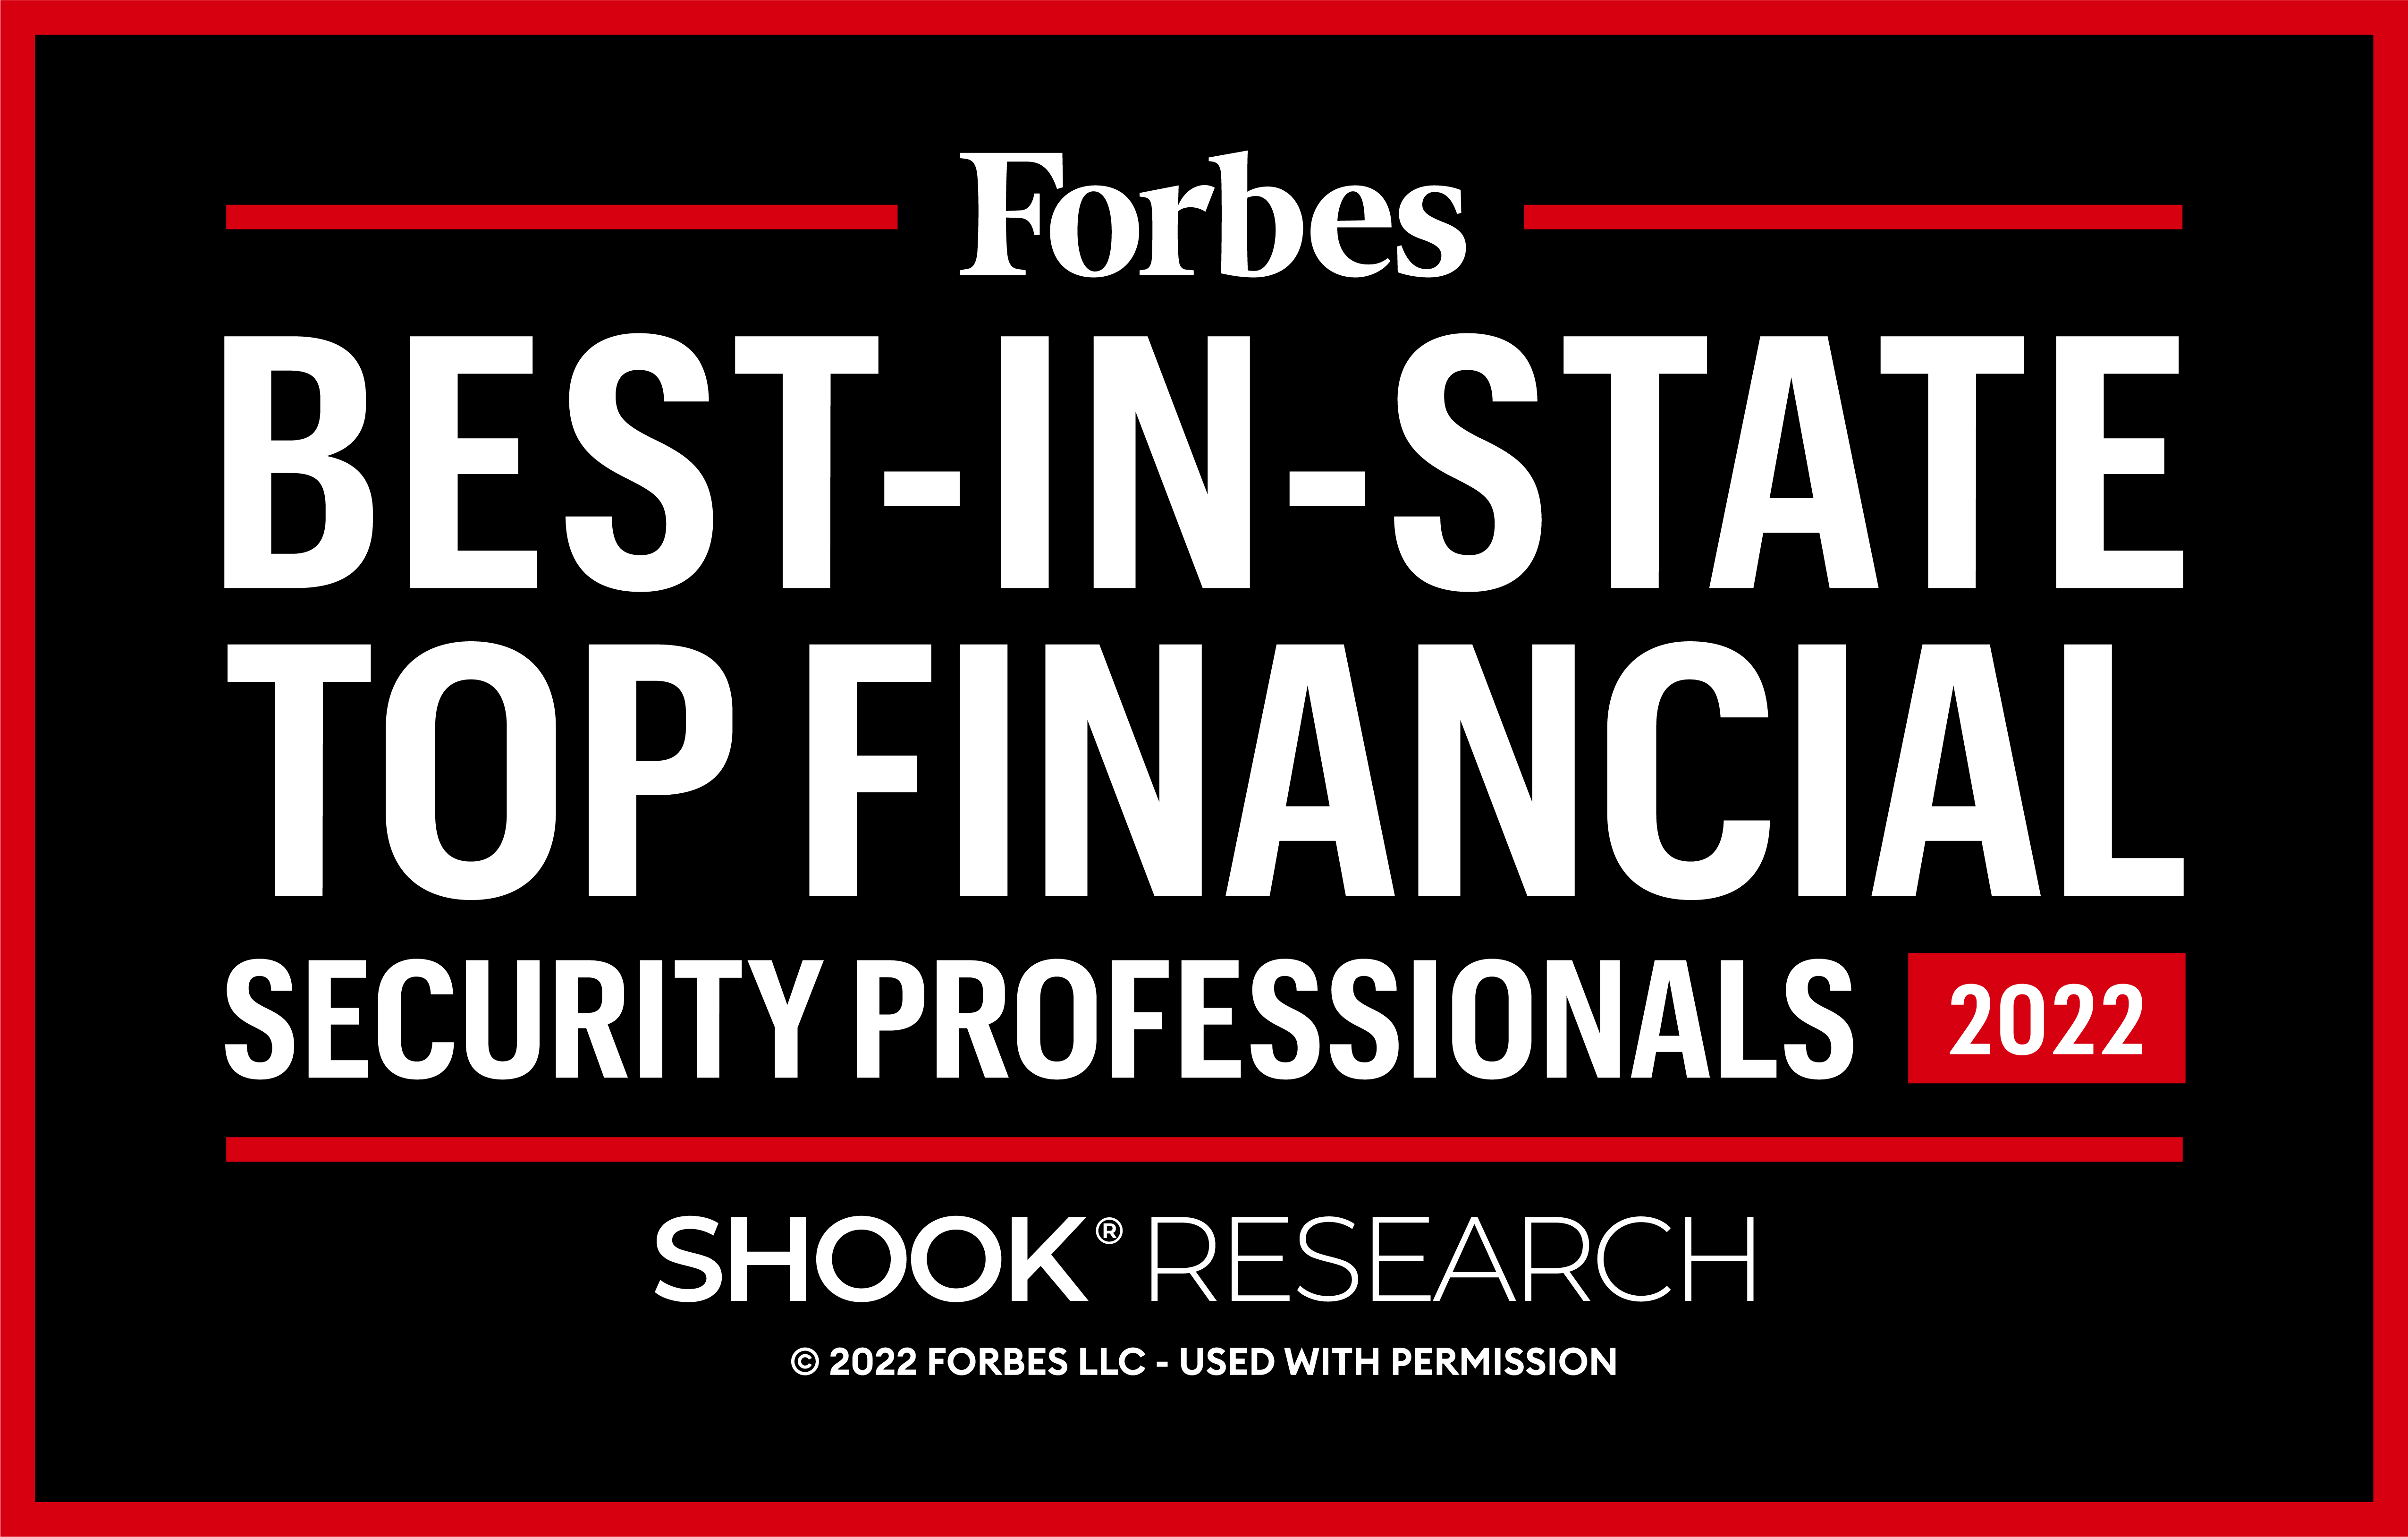 Forbes Best-in-State Top Financial Security Professionals 2022 Award